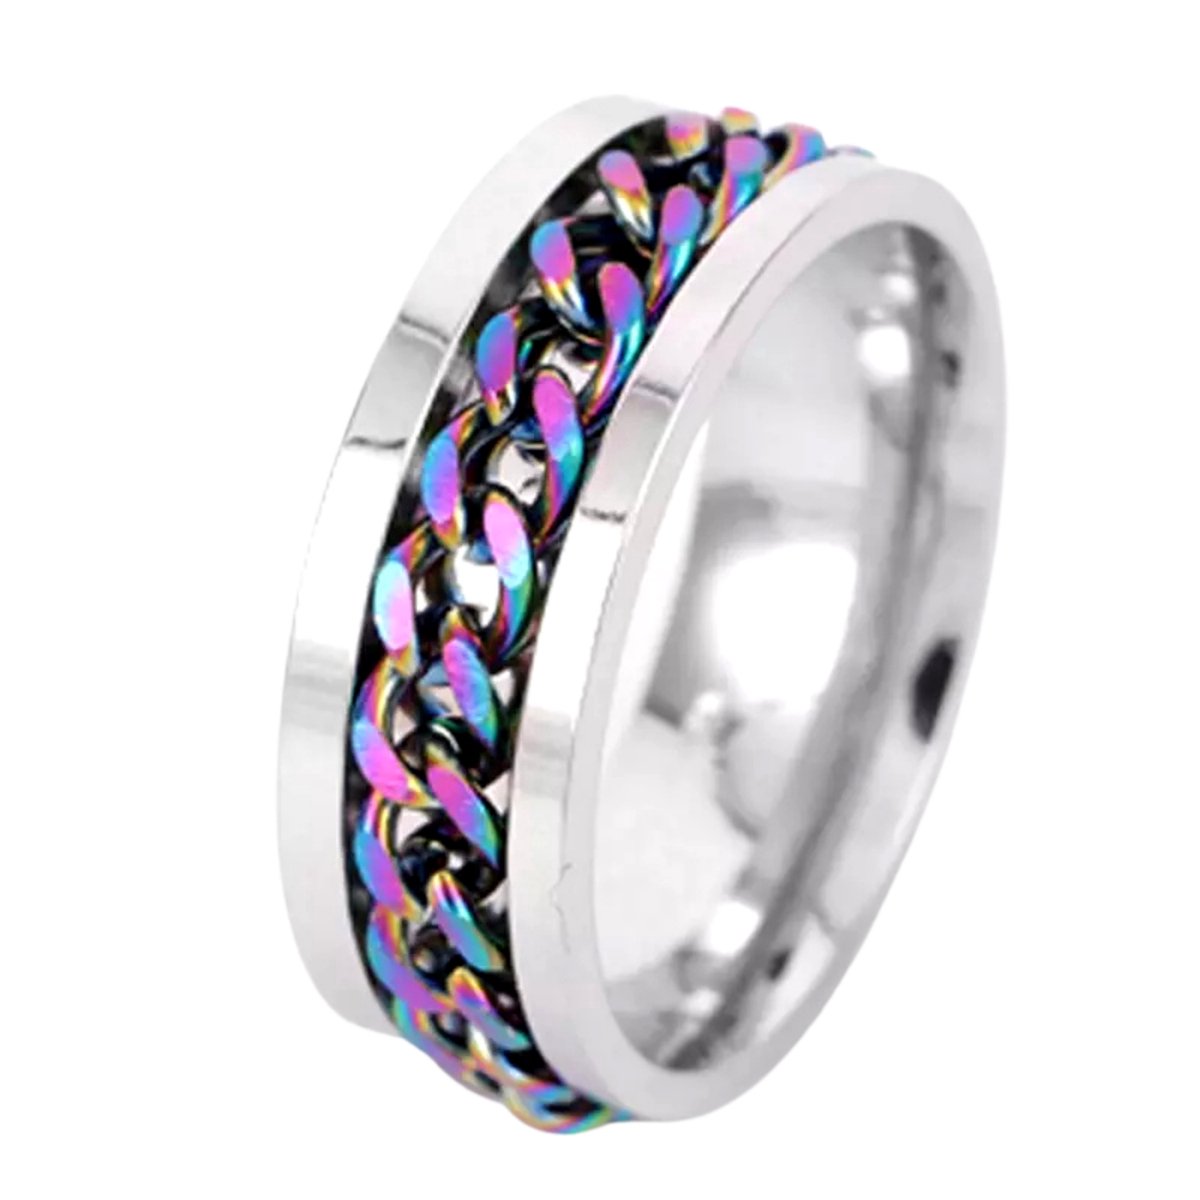 Anxiety Ring - (Kettinkje) - Stress Ring - Fidget Ring - Anxiety Ring For Finger - Draaibare Ring - Spinning Ring - Regenboog - (23.25 mm / maat 73)